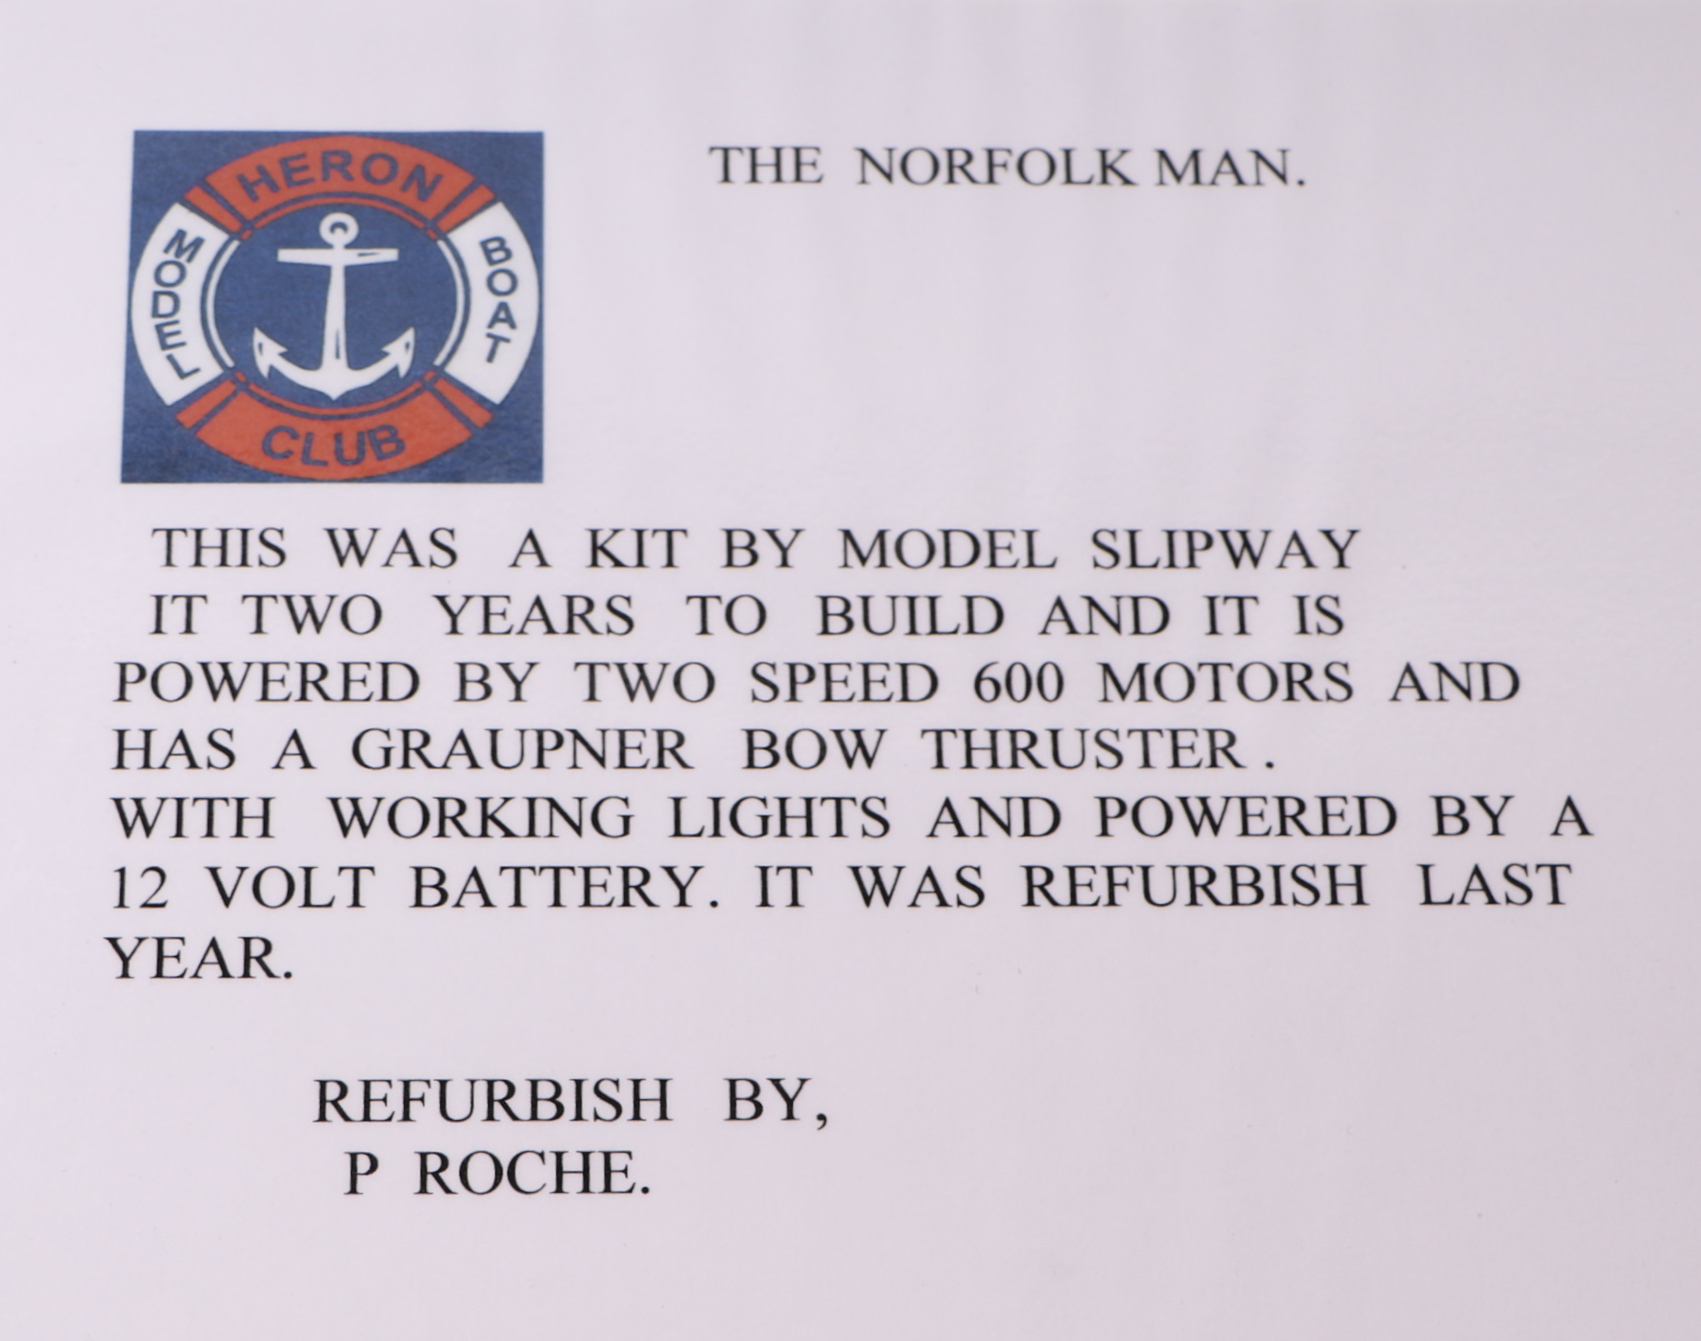 Nautical interest: The Norfolk Man, a kit built by Model Slipway, powered by two-speed 600 motors - Image 7 of 7